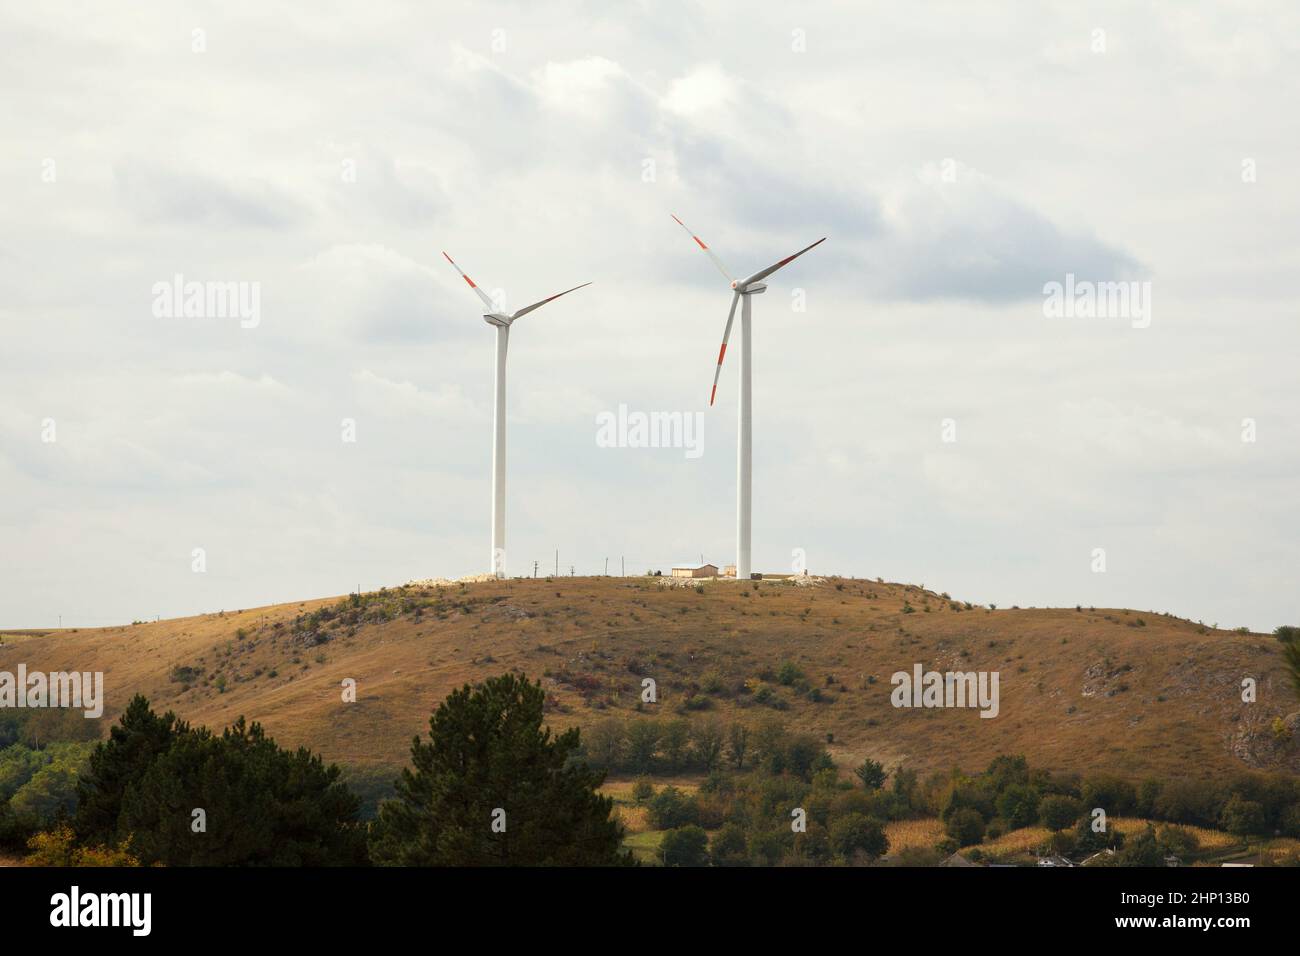 Landscape of autumn forest with vertical wind farms and with deciduous trees, which have leaves of greeen autumn shades Stock Photo